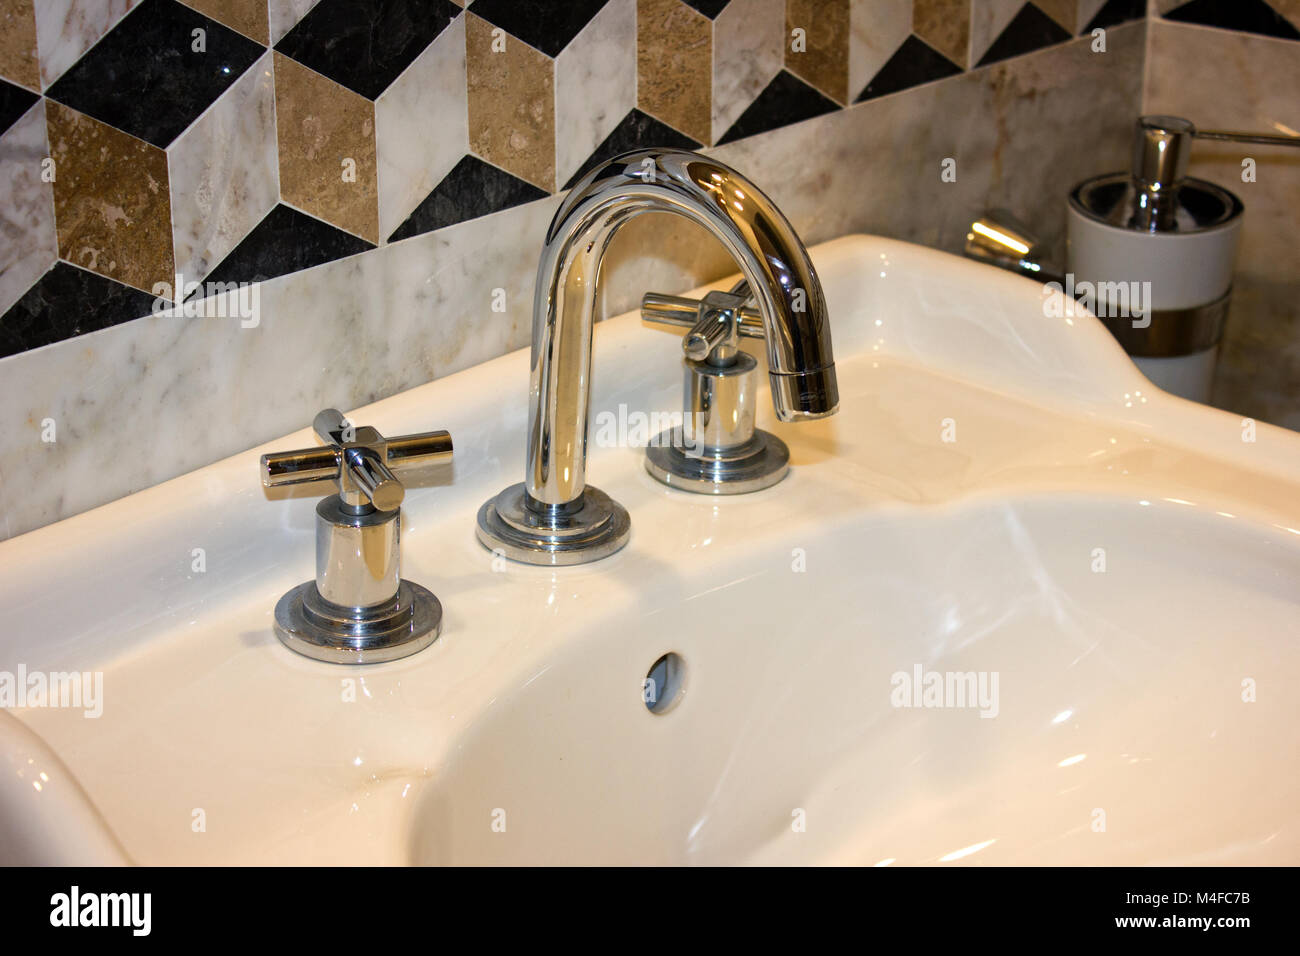 Shiny Clean Sink And Faucet In The Marble Room Stock Photo